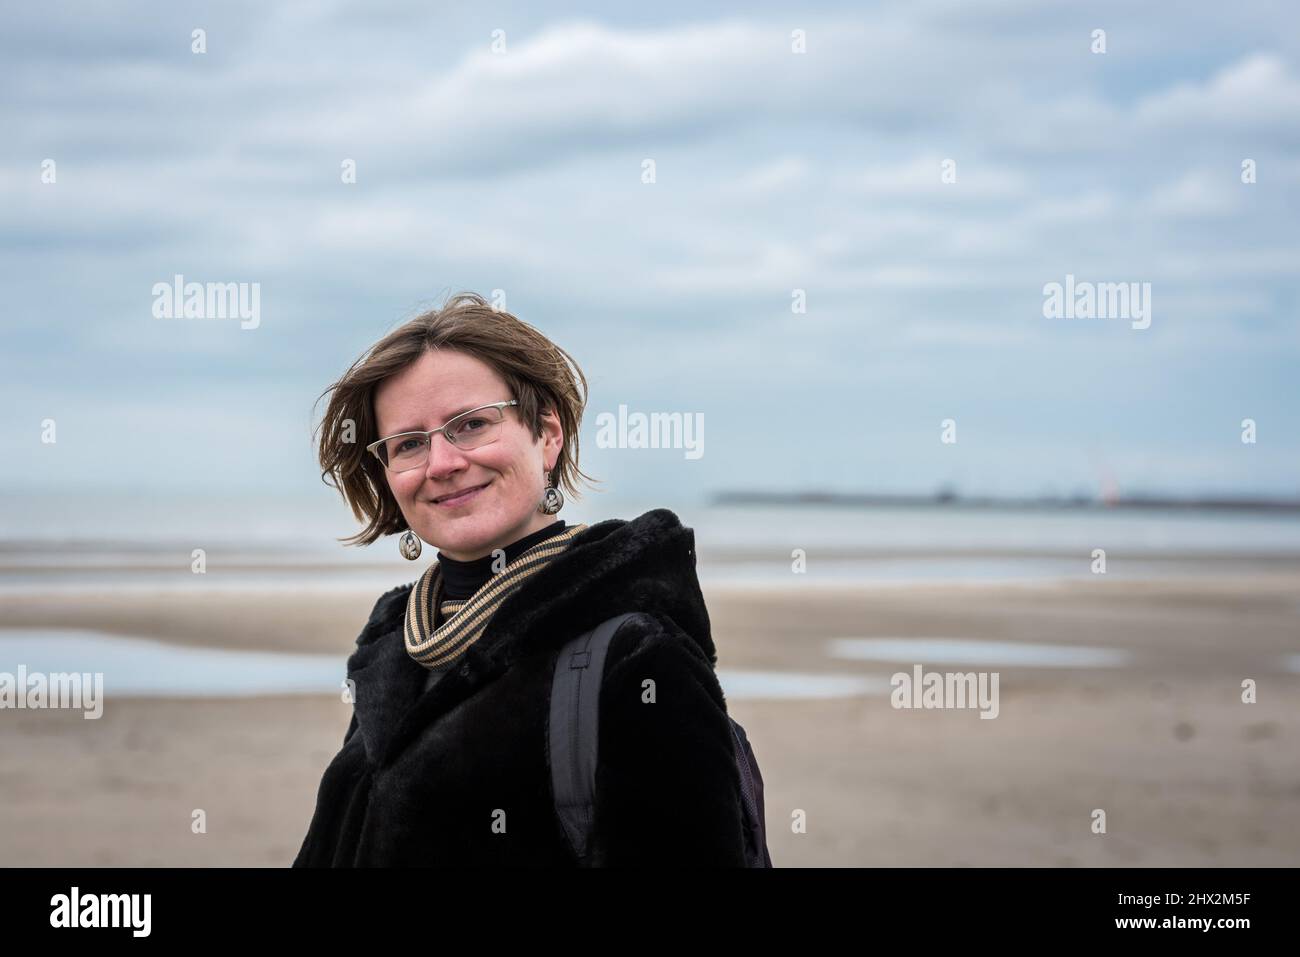 Portrait of a 30 year old white woman, standing on the beach with winter clothes. Stock Photo